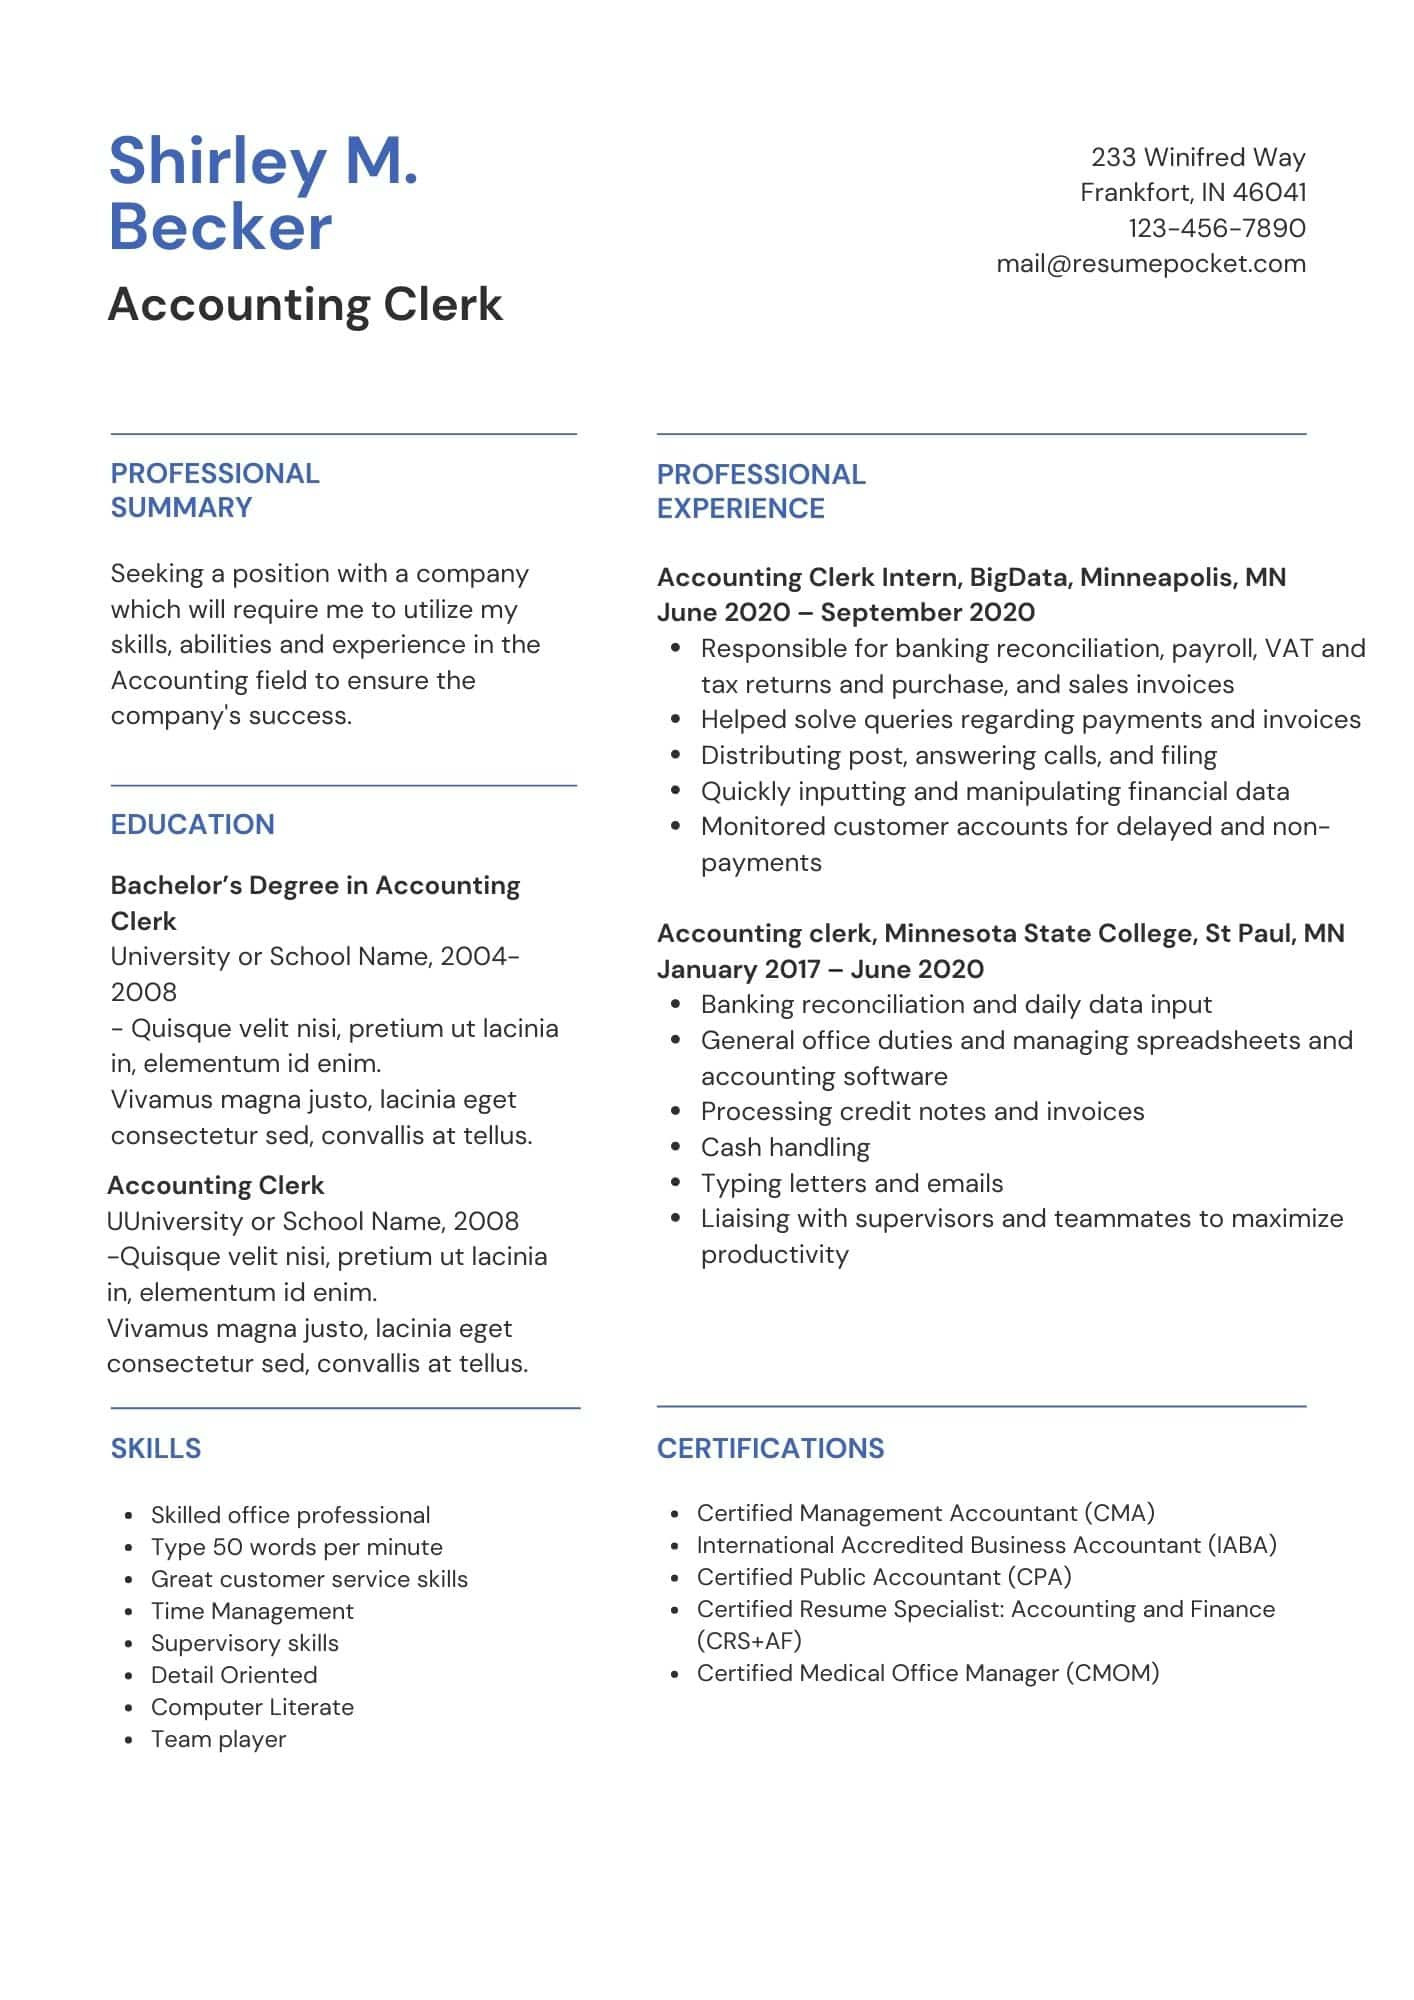 Sample Resume Objectives for Accounting Clerk Accounting Clerk Resume Sample and Template – Resumepocket